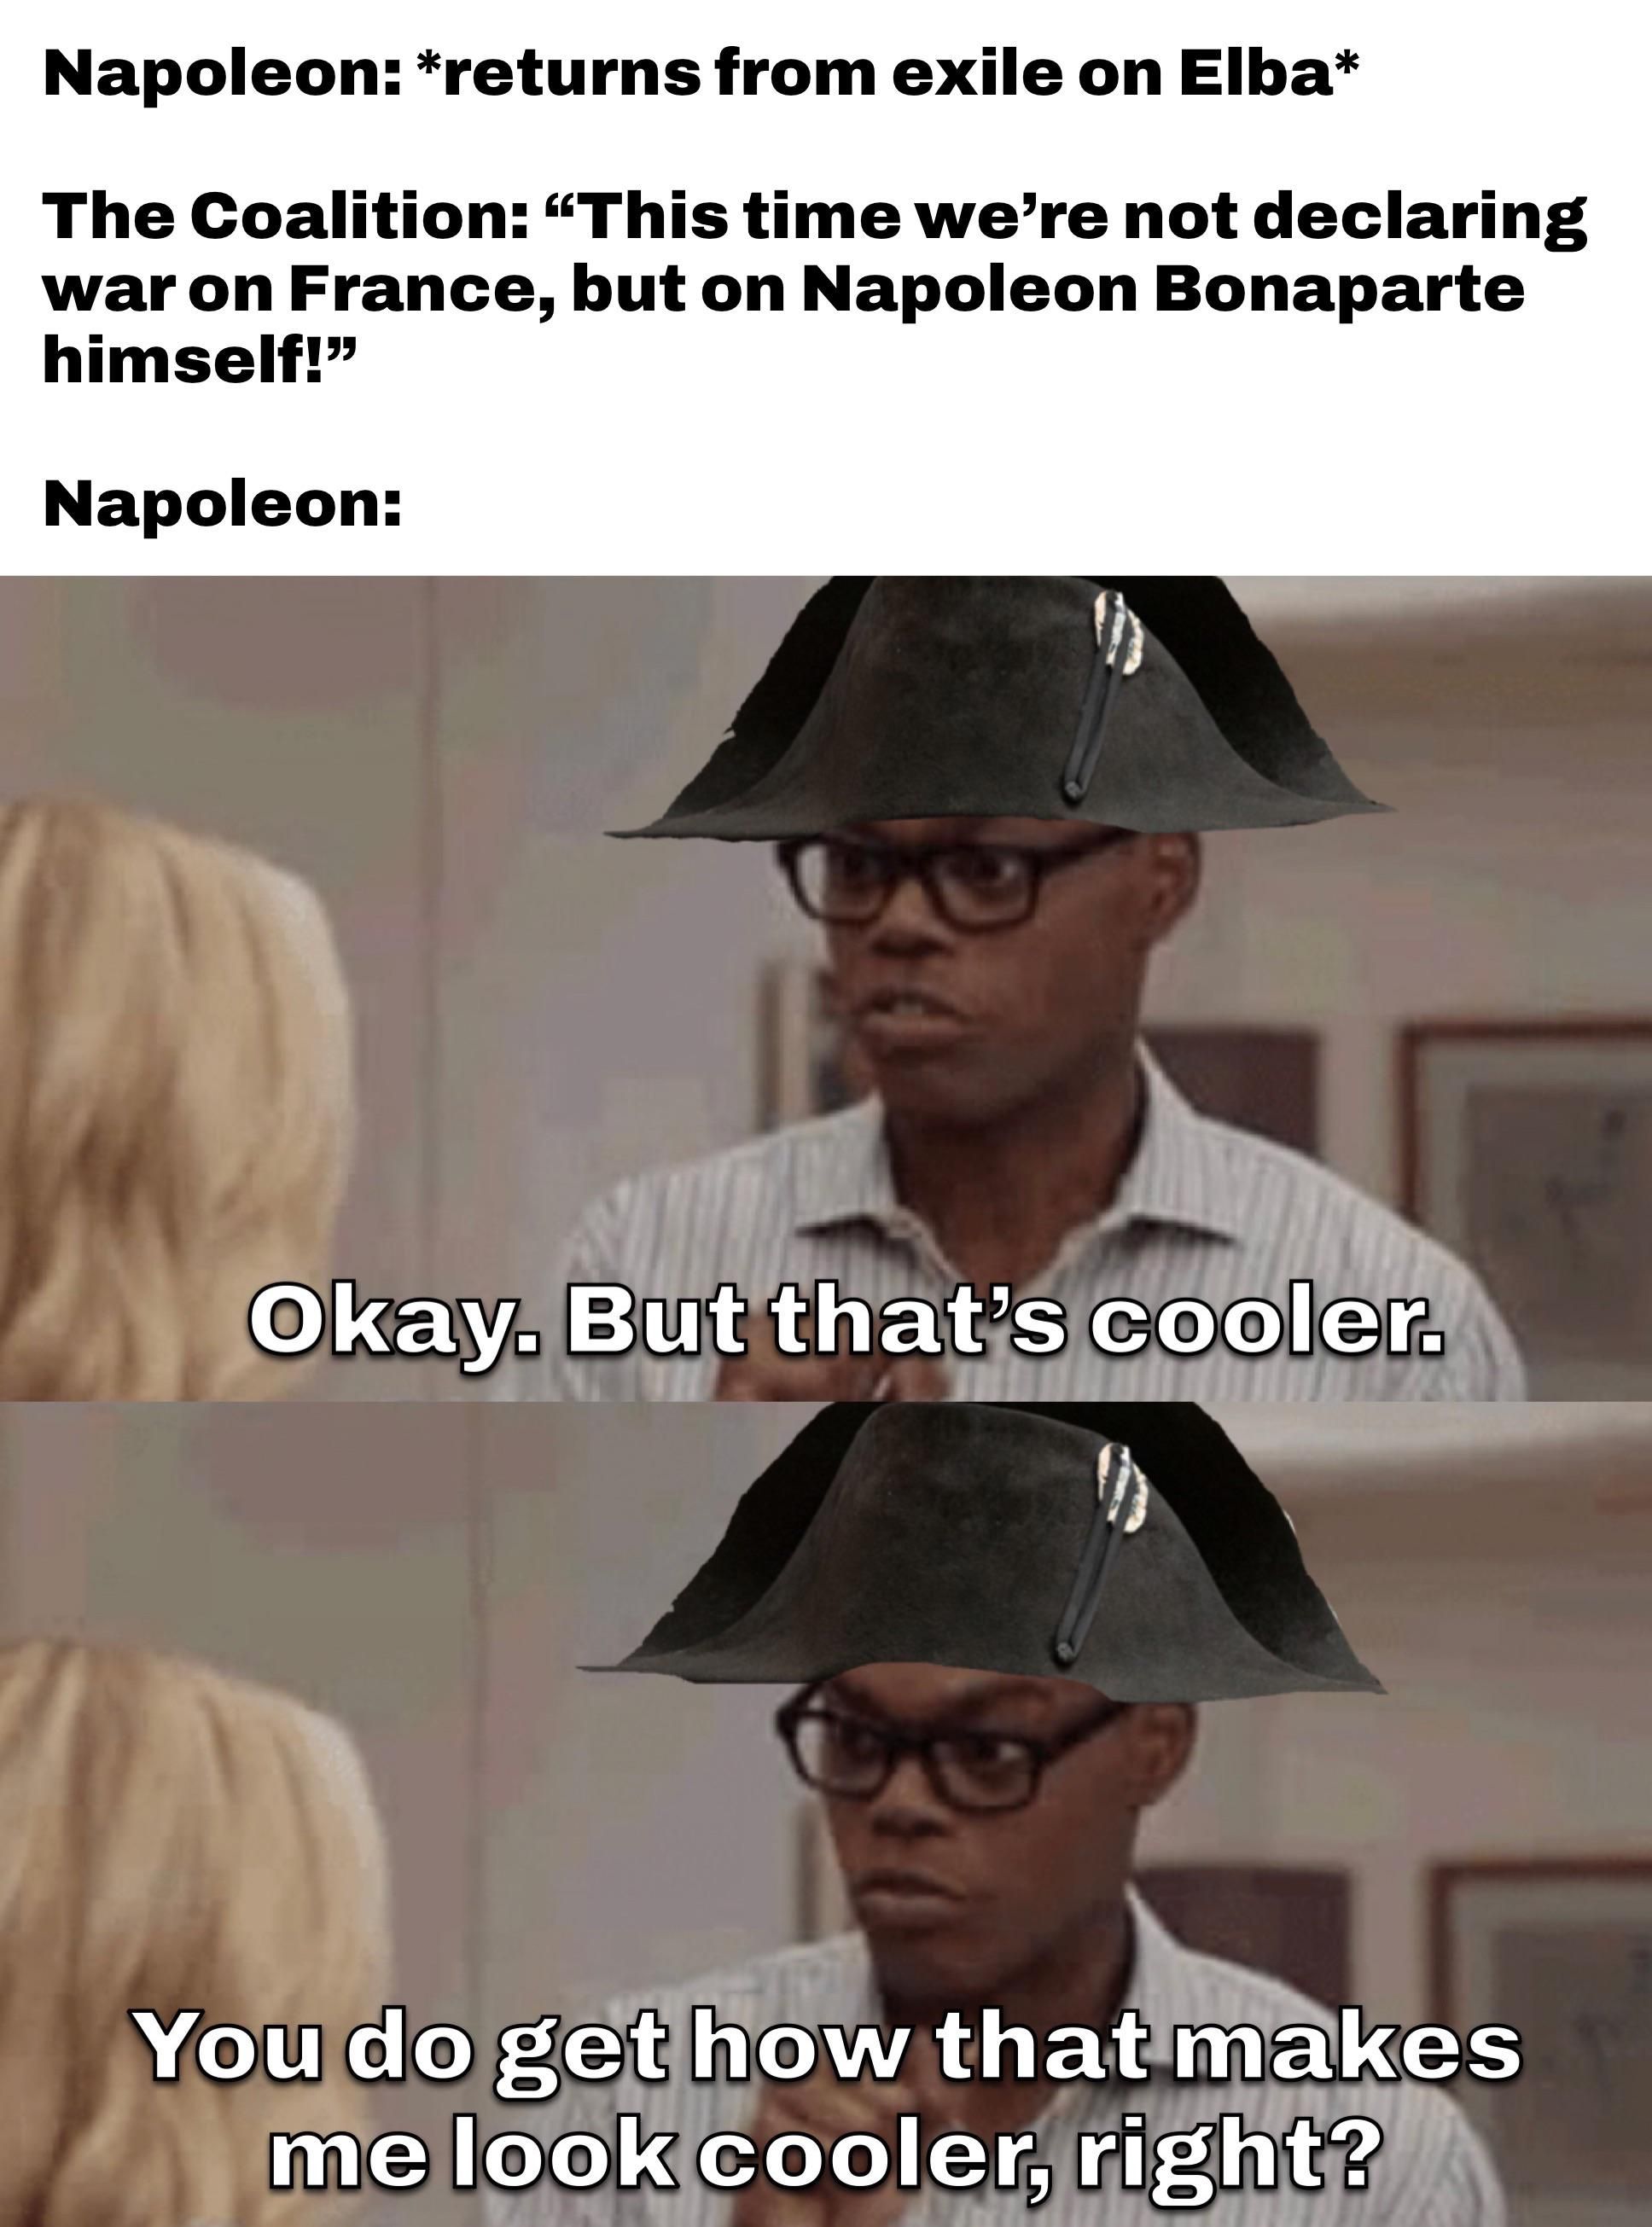 It’s hilarious how utterly done the Coalition was with Napoleon by that point. They just wanted him gone.